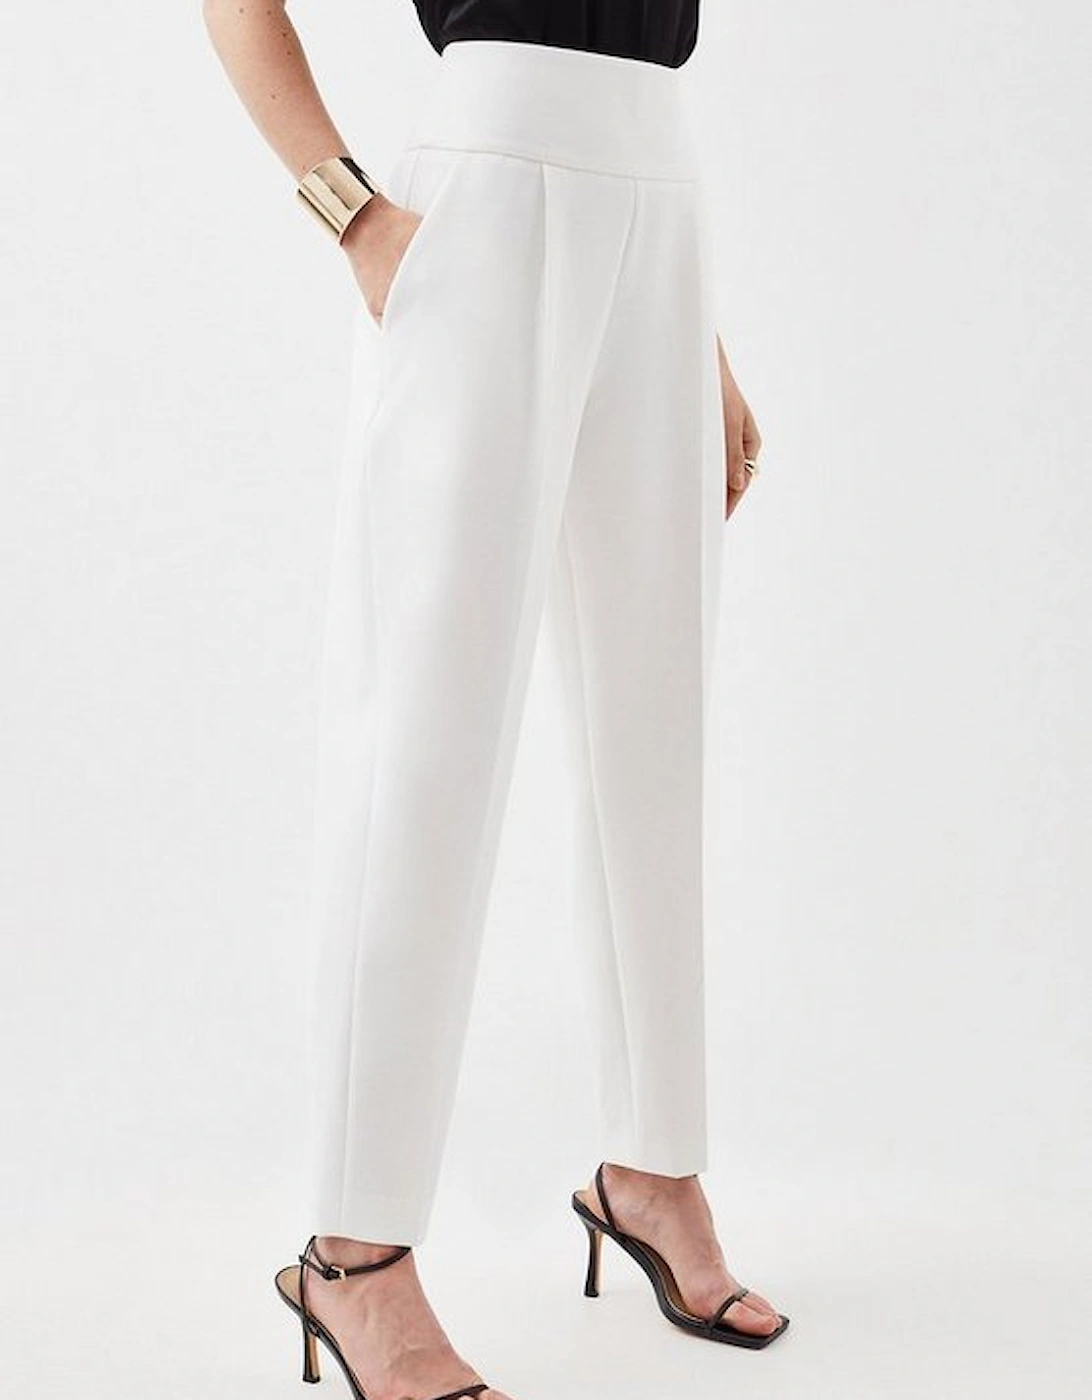 Compact Stretch High Waisted Straight Leg Trouser